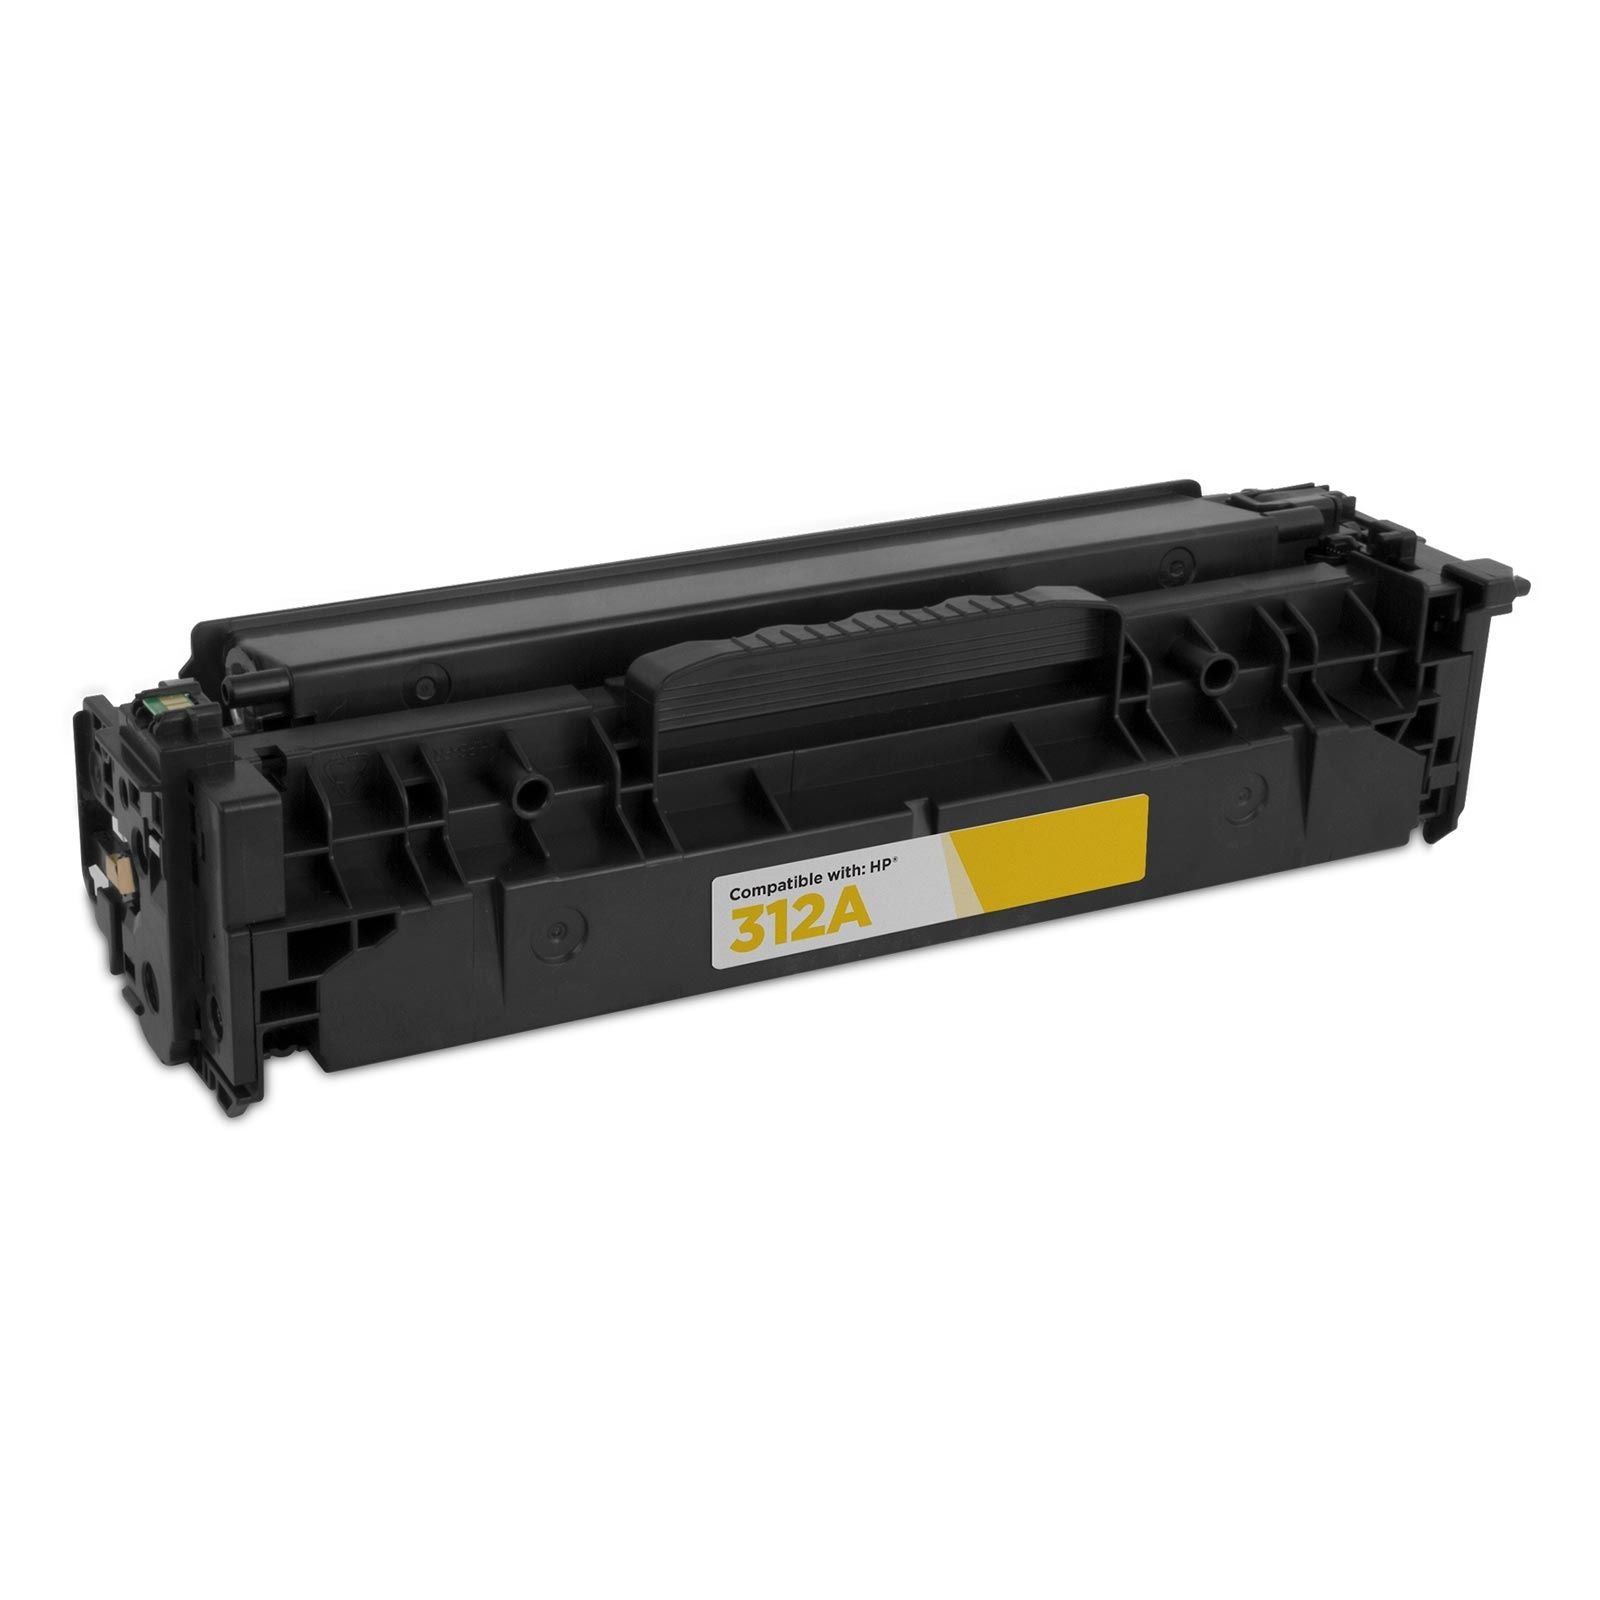 IMPERIAL BRAND Compatible toner cartridge for HP YELLOW 312A TONER 2,700 PAGES